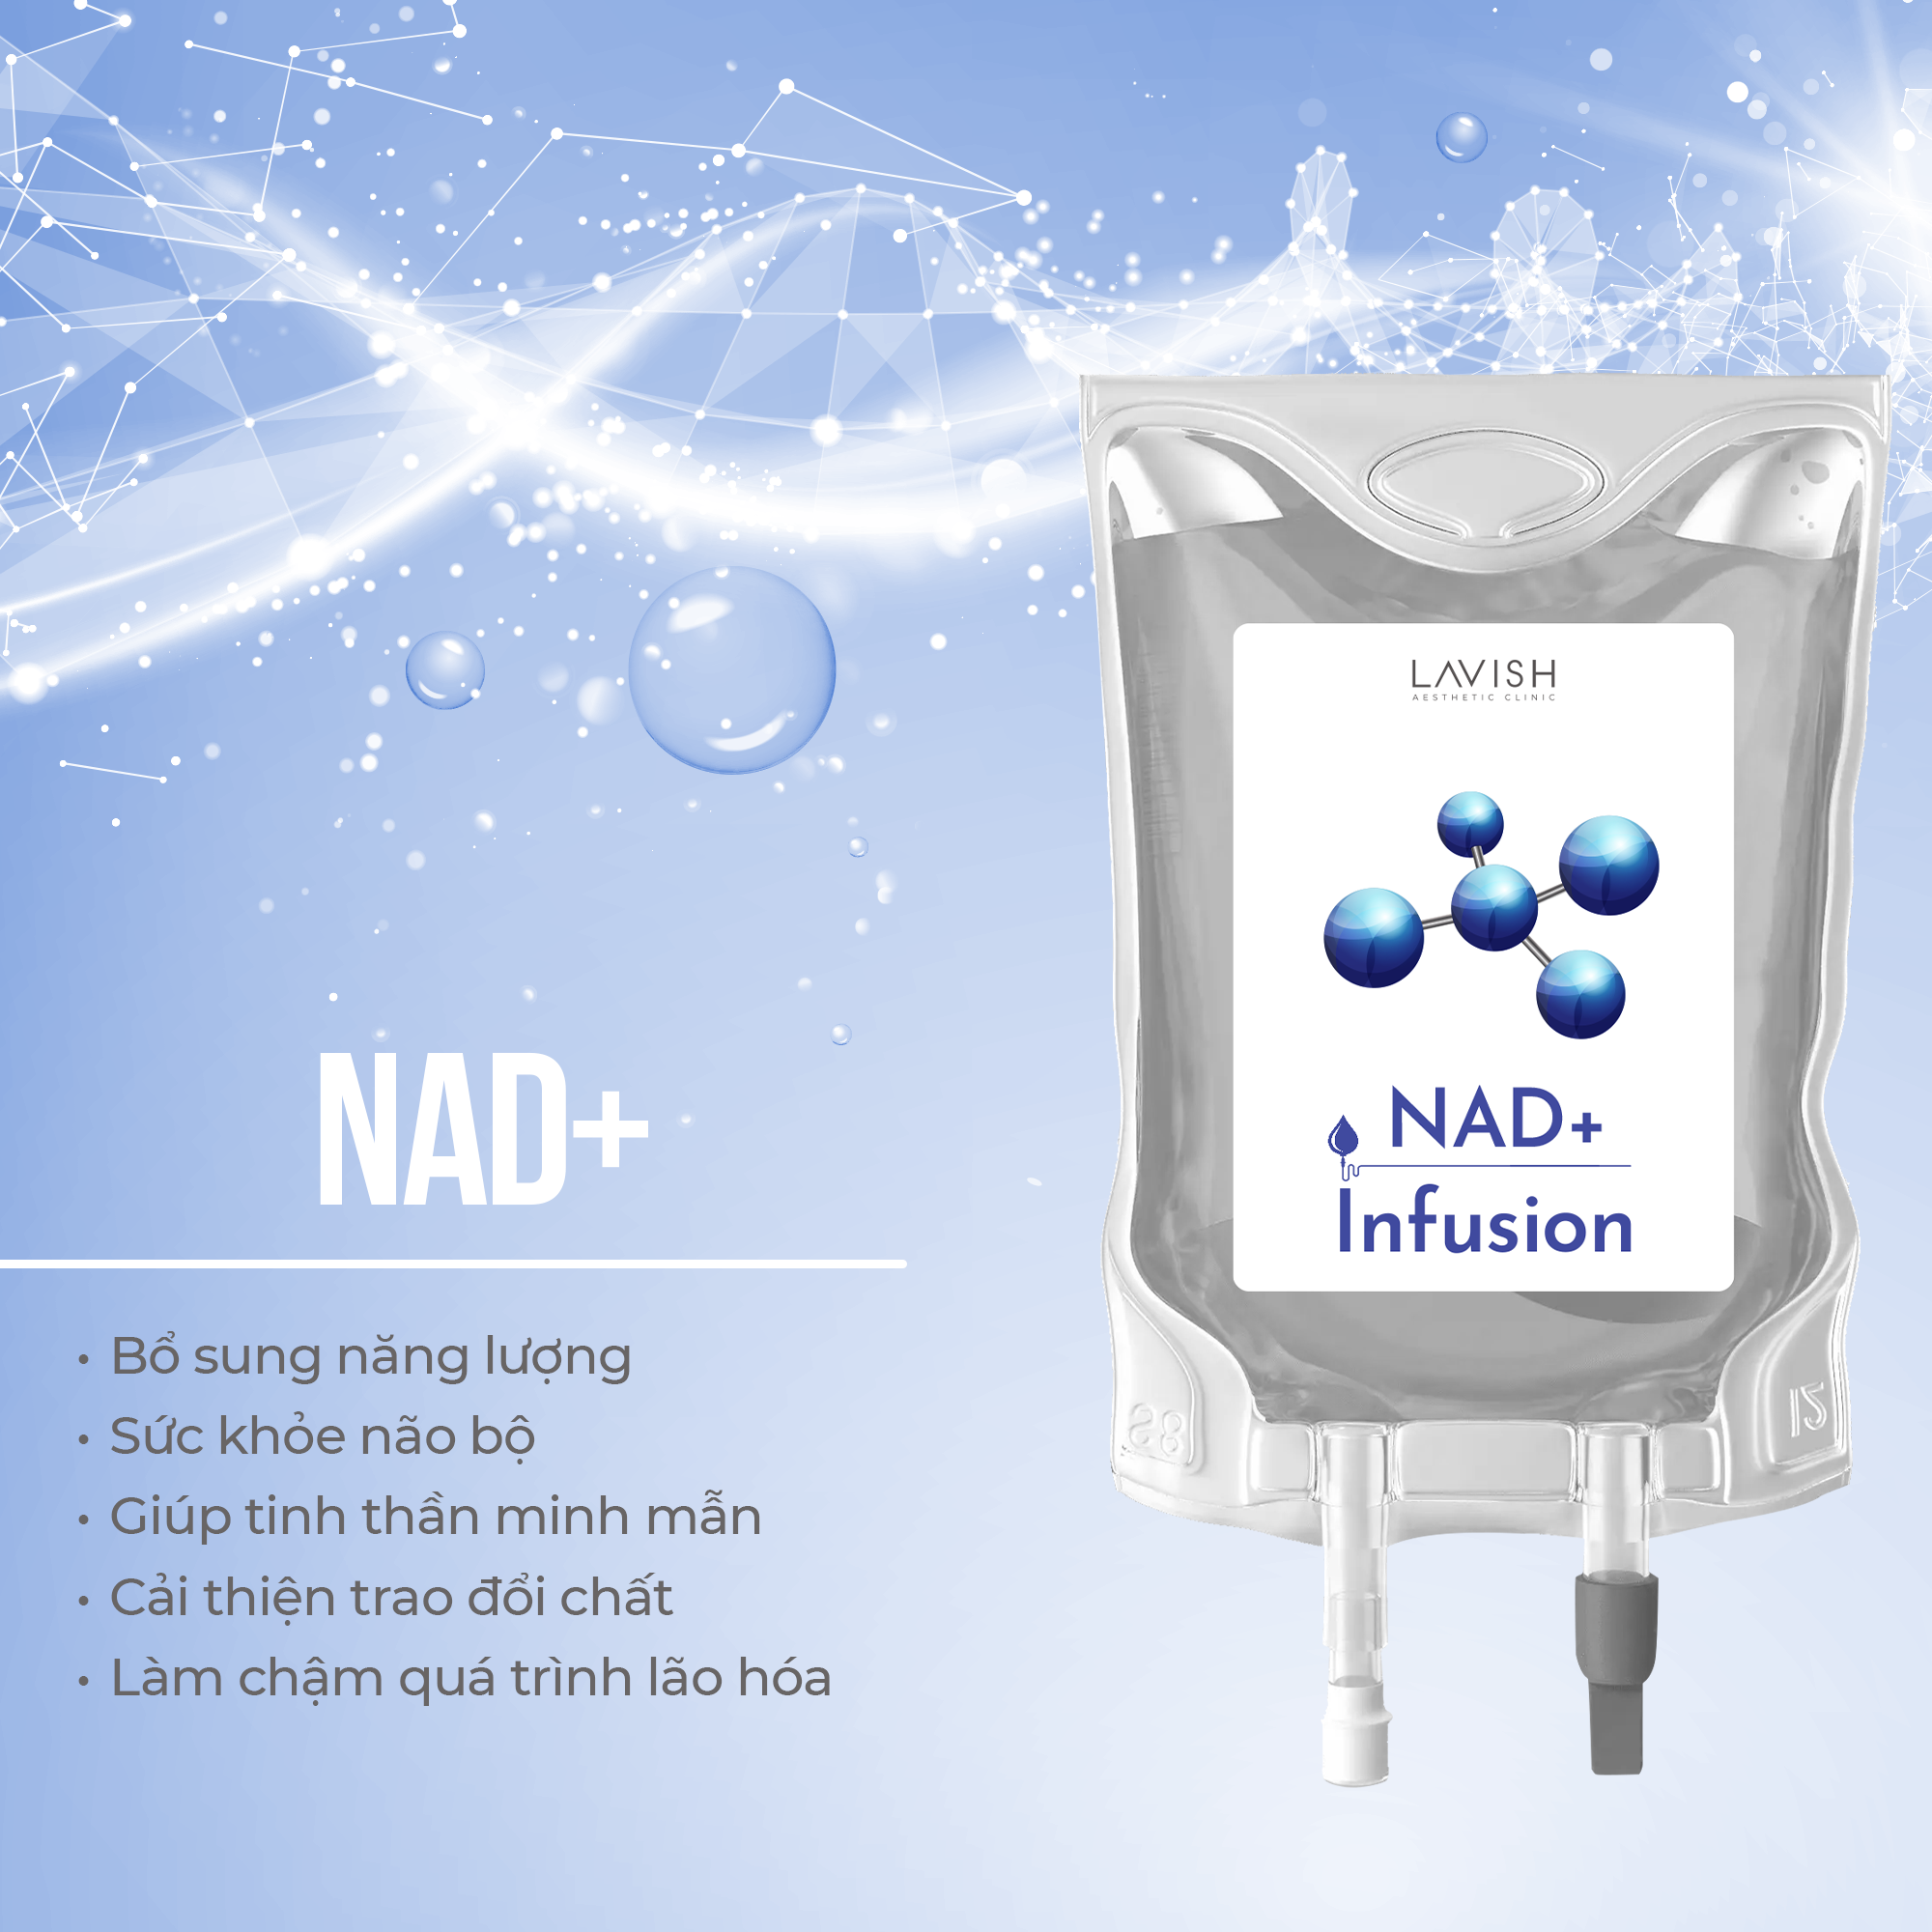 nad infusion